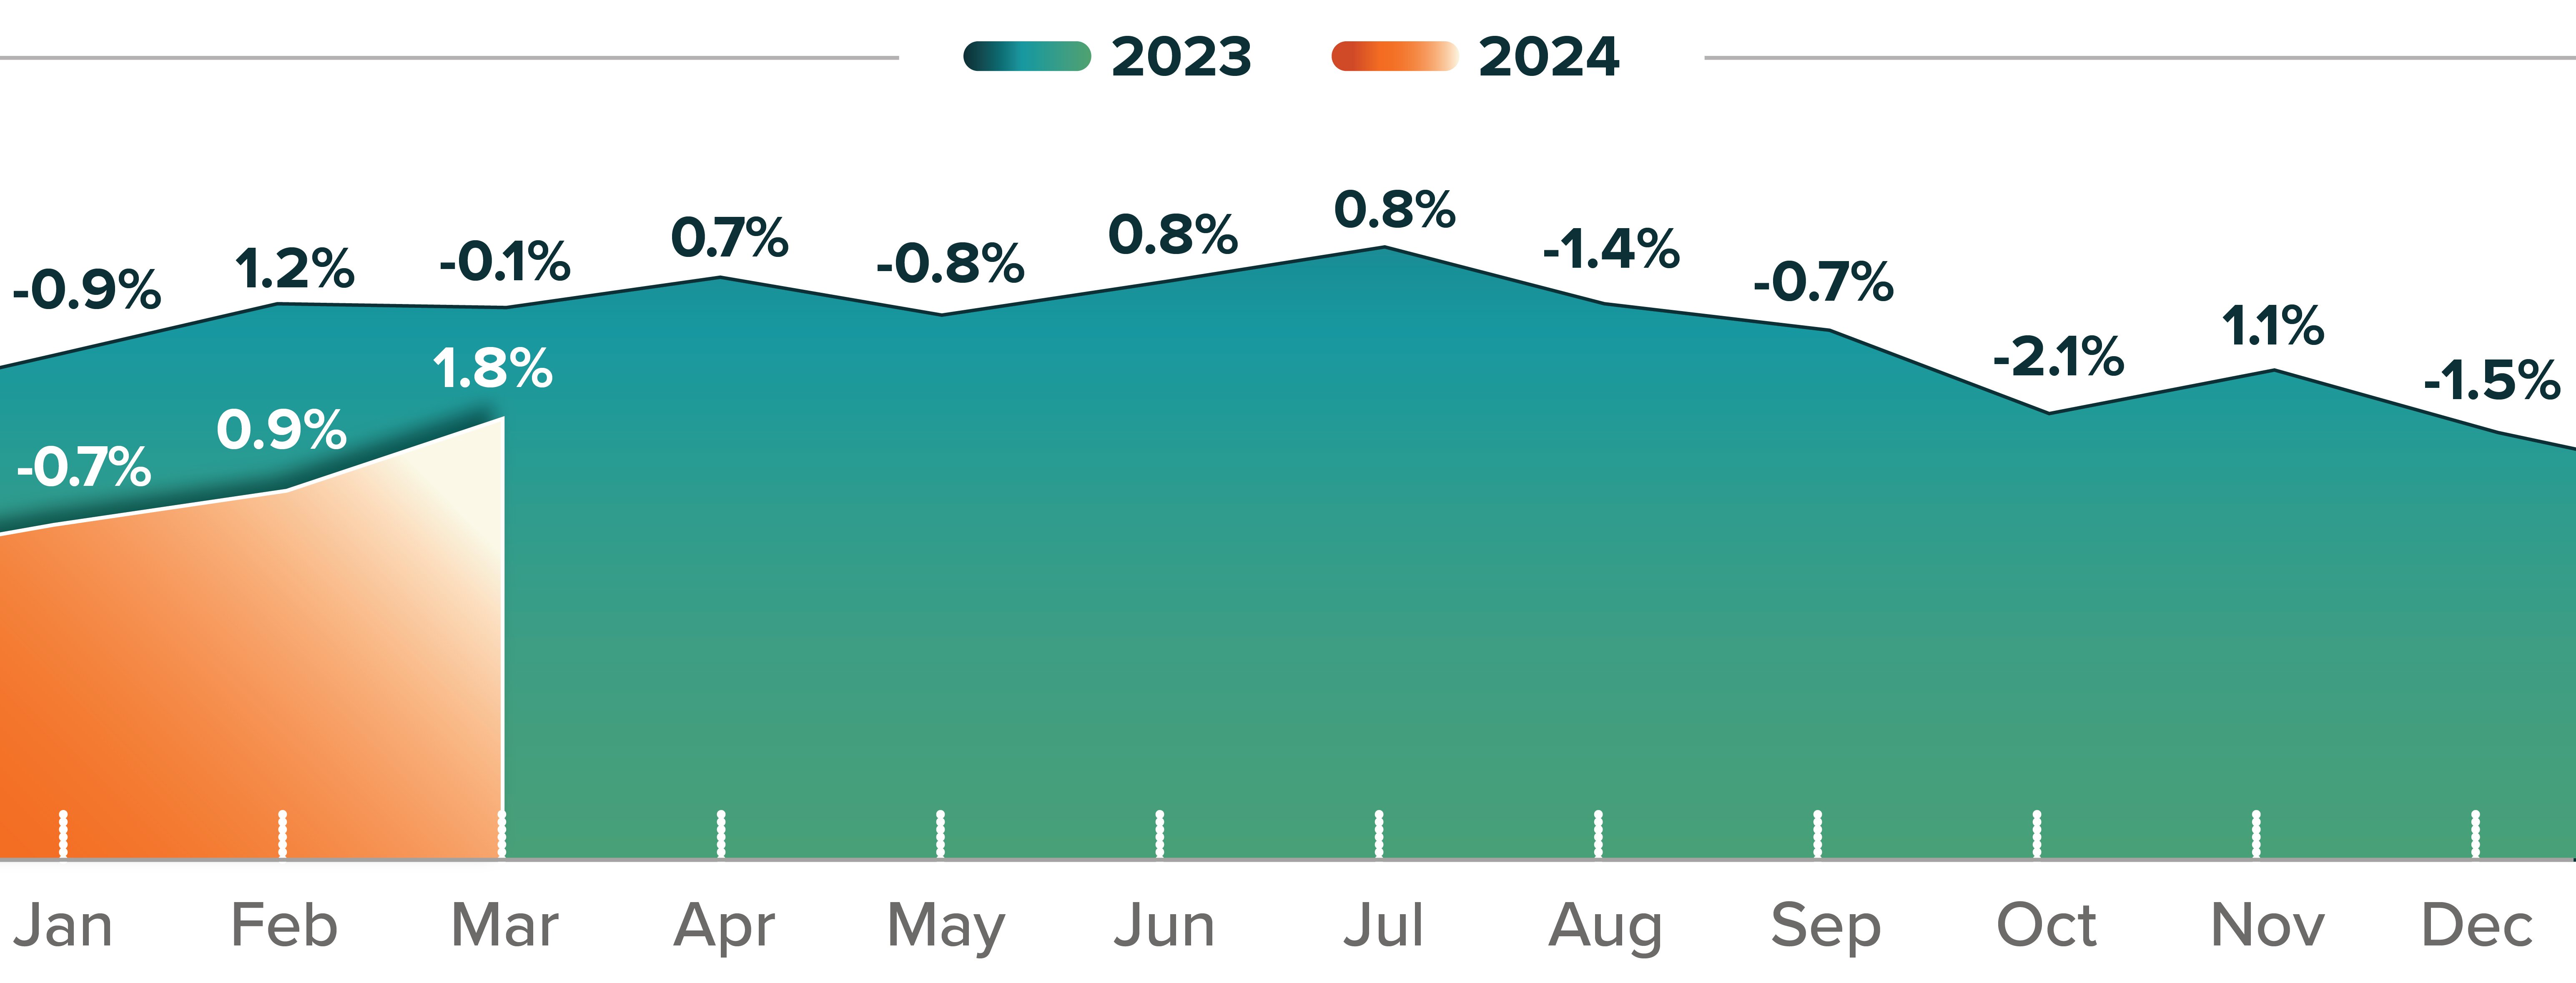 JM&A Group Automotive trends report 2023 year-end front PVR 2019 & 2023 chart